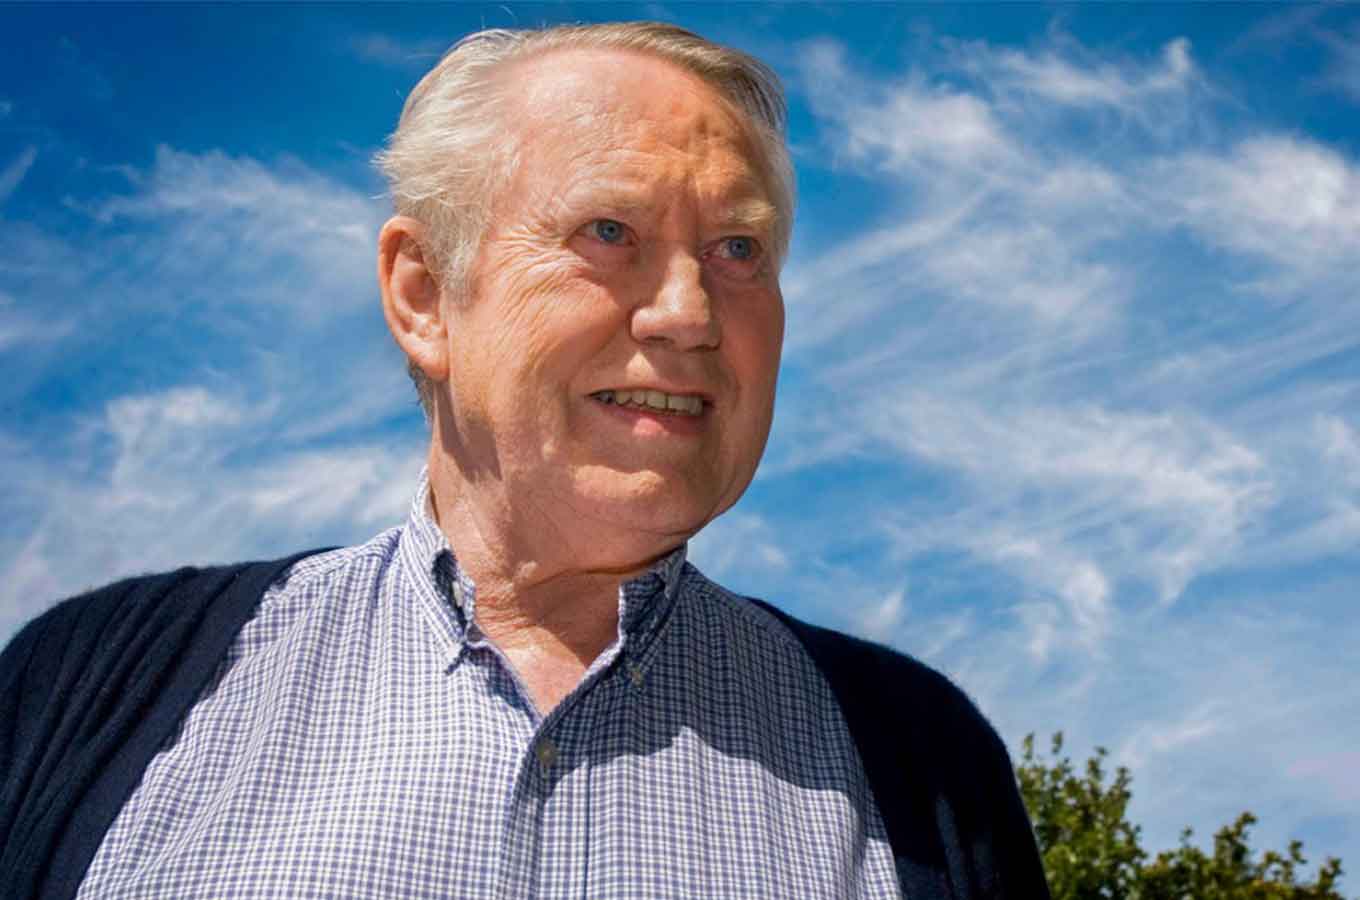 Chuck Feeney smiles as she stands under a blue sky.